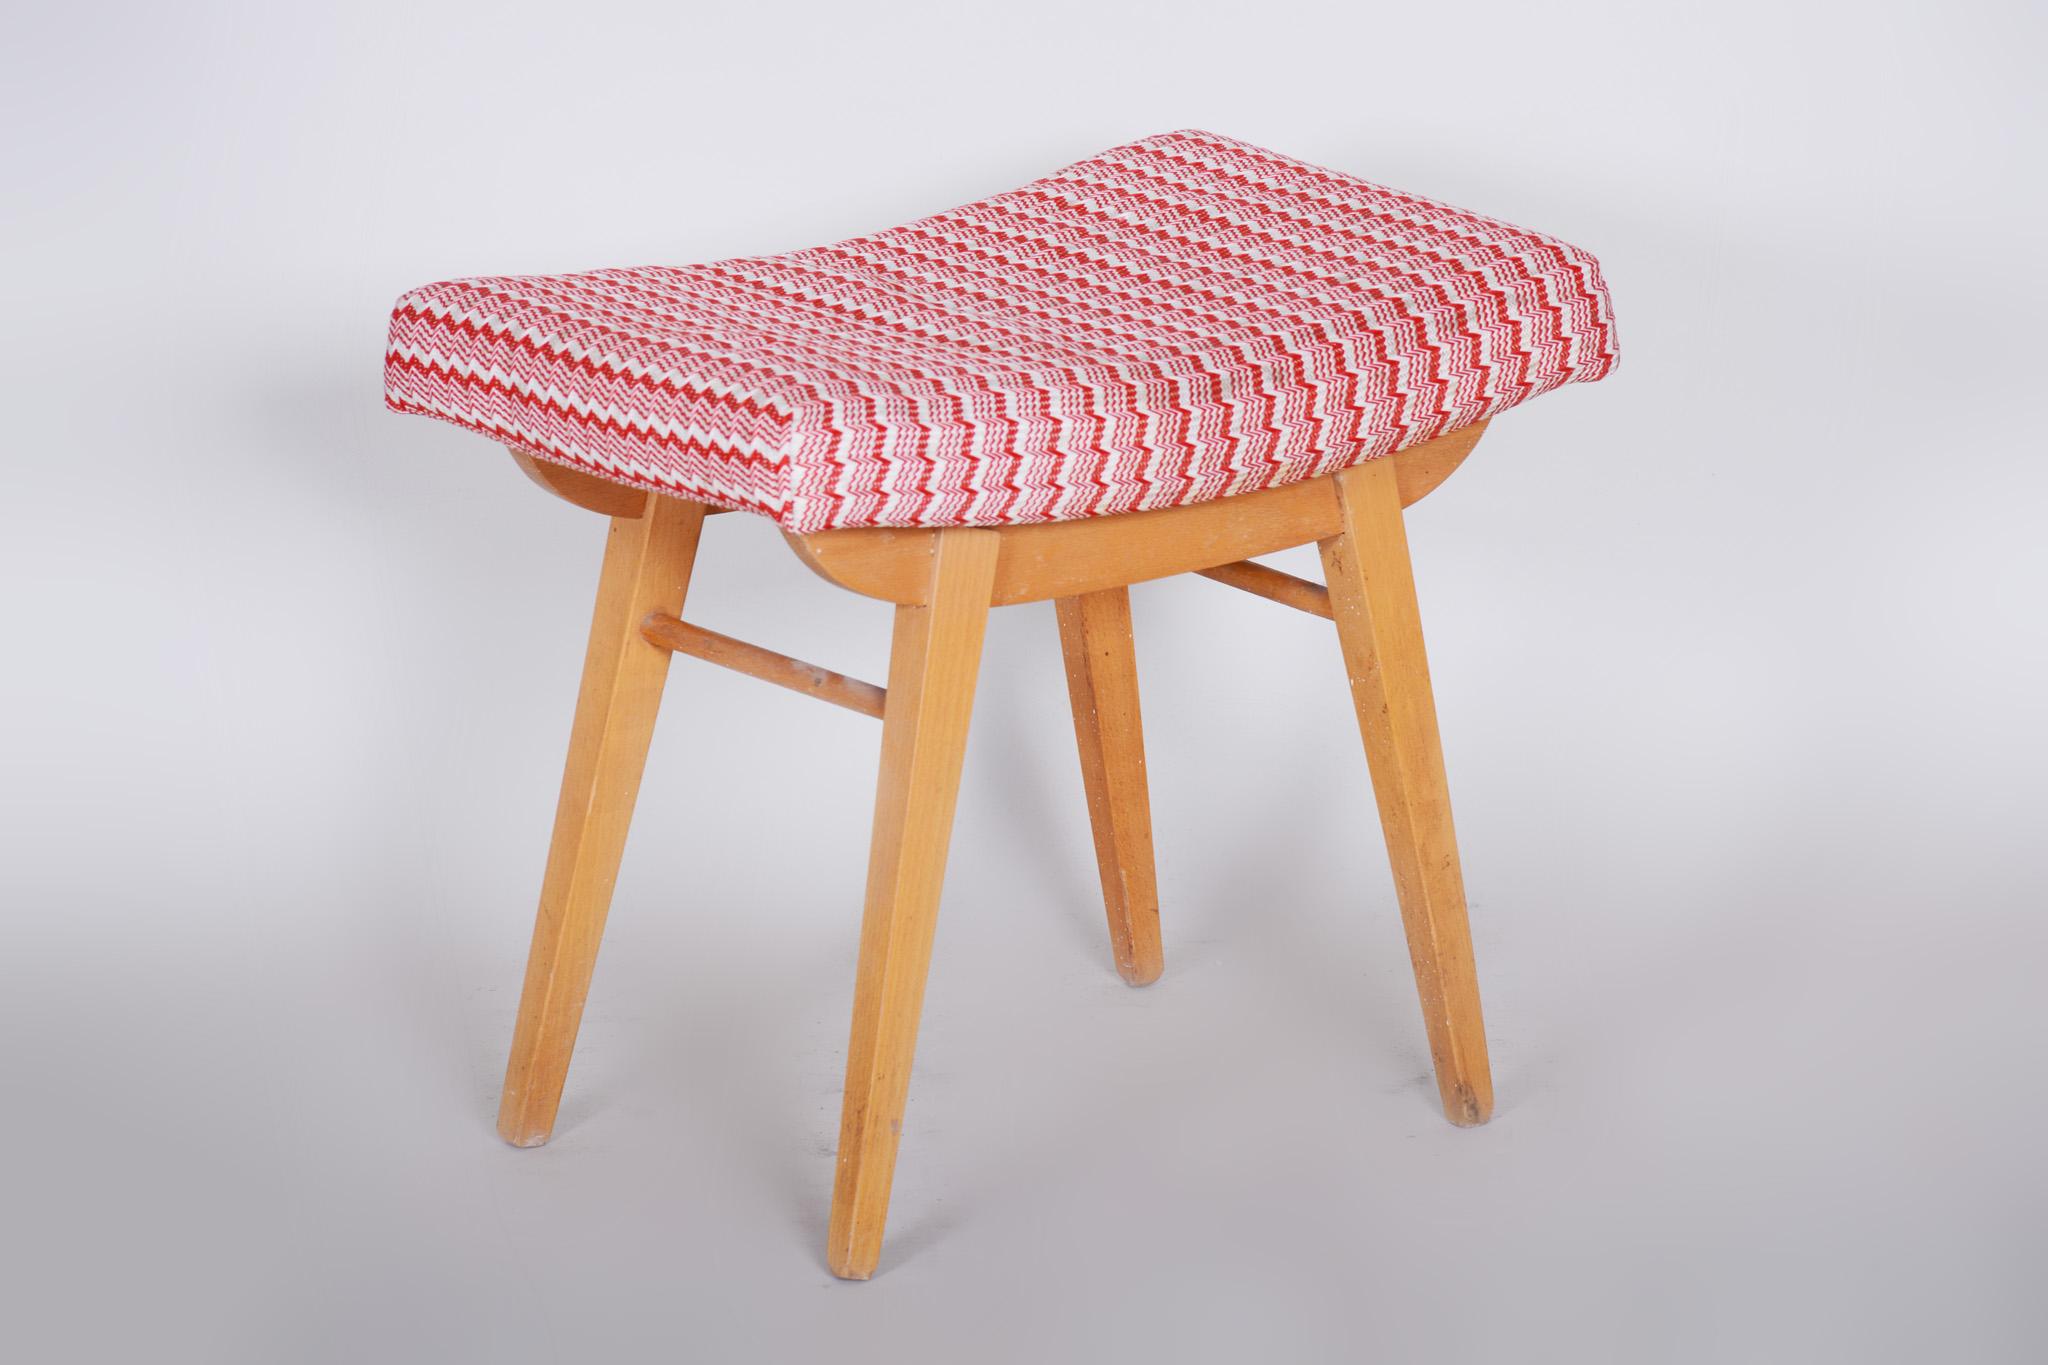 Czech Red and White Midcentury Beech Stool, 1960s, Original Preserved Condition For Sale